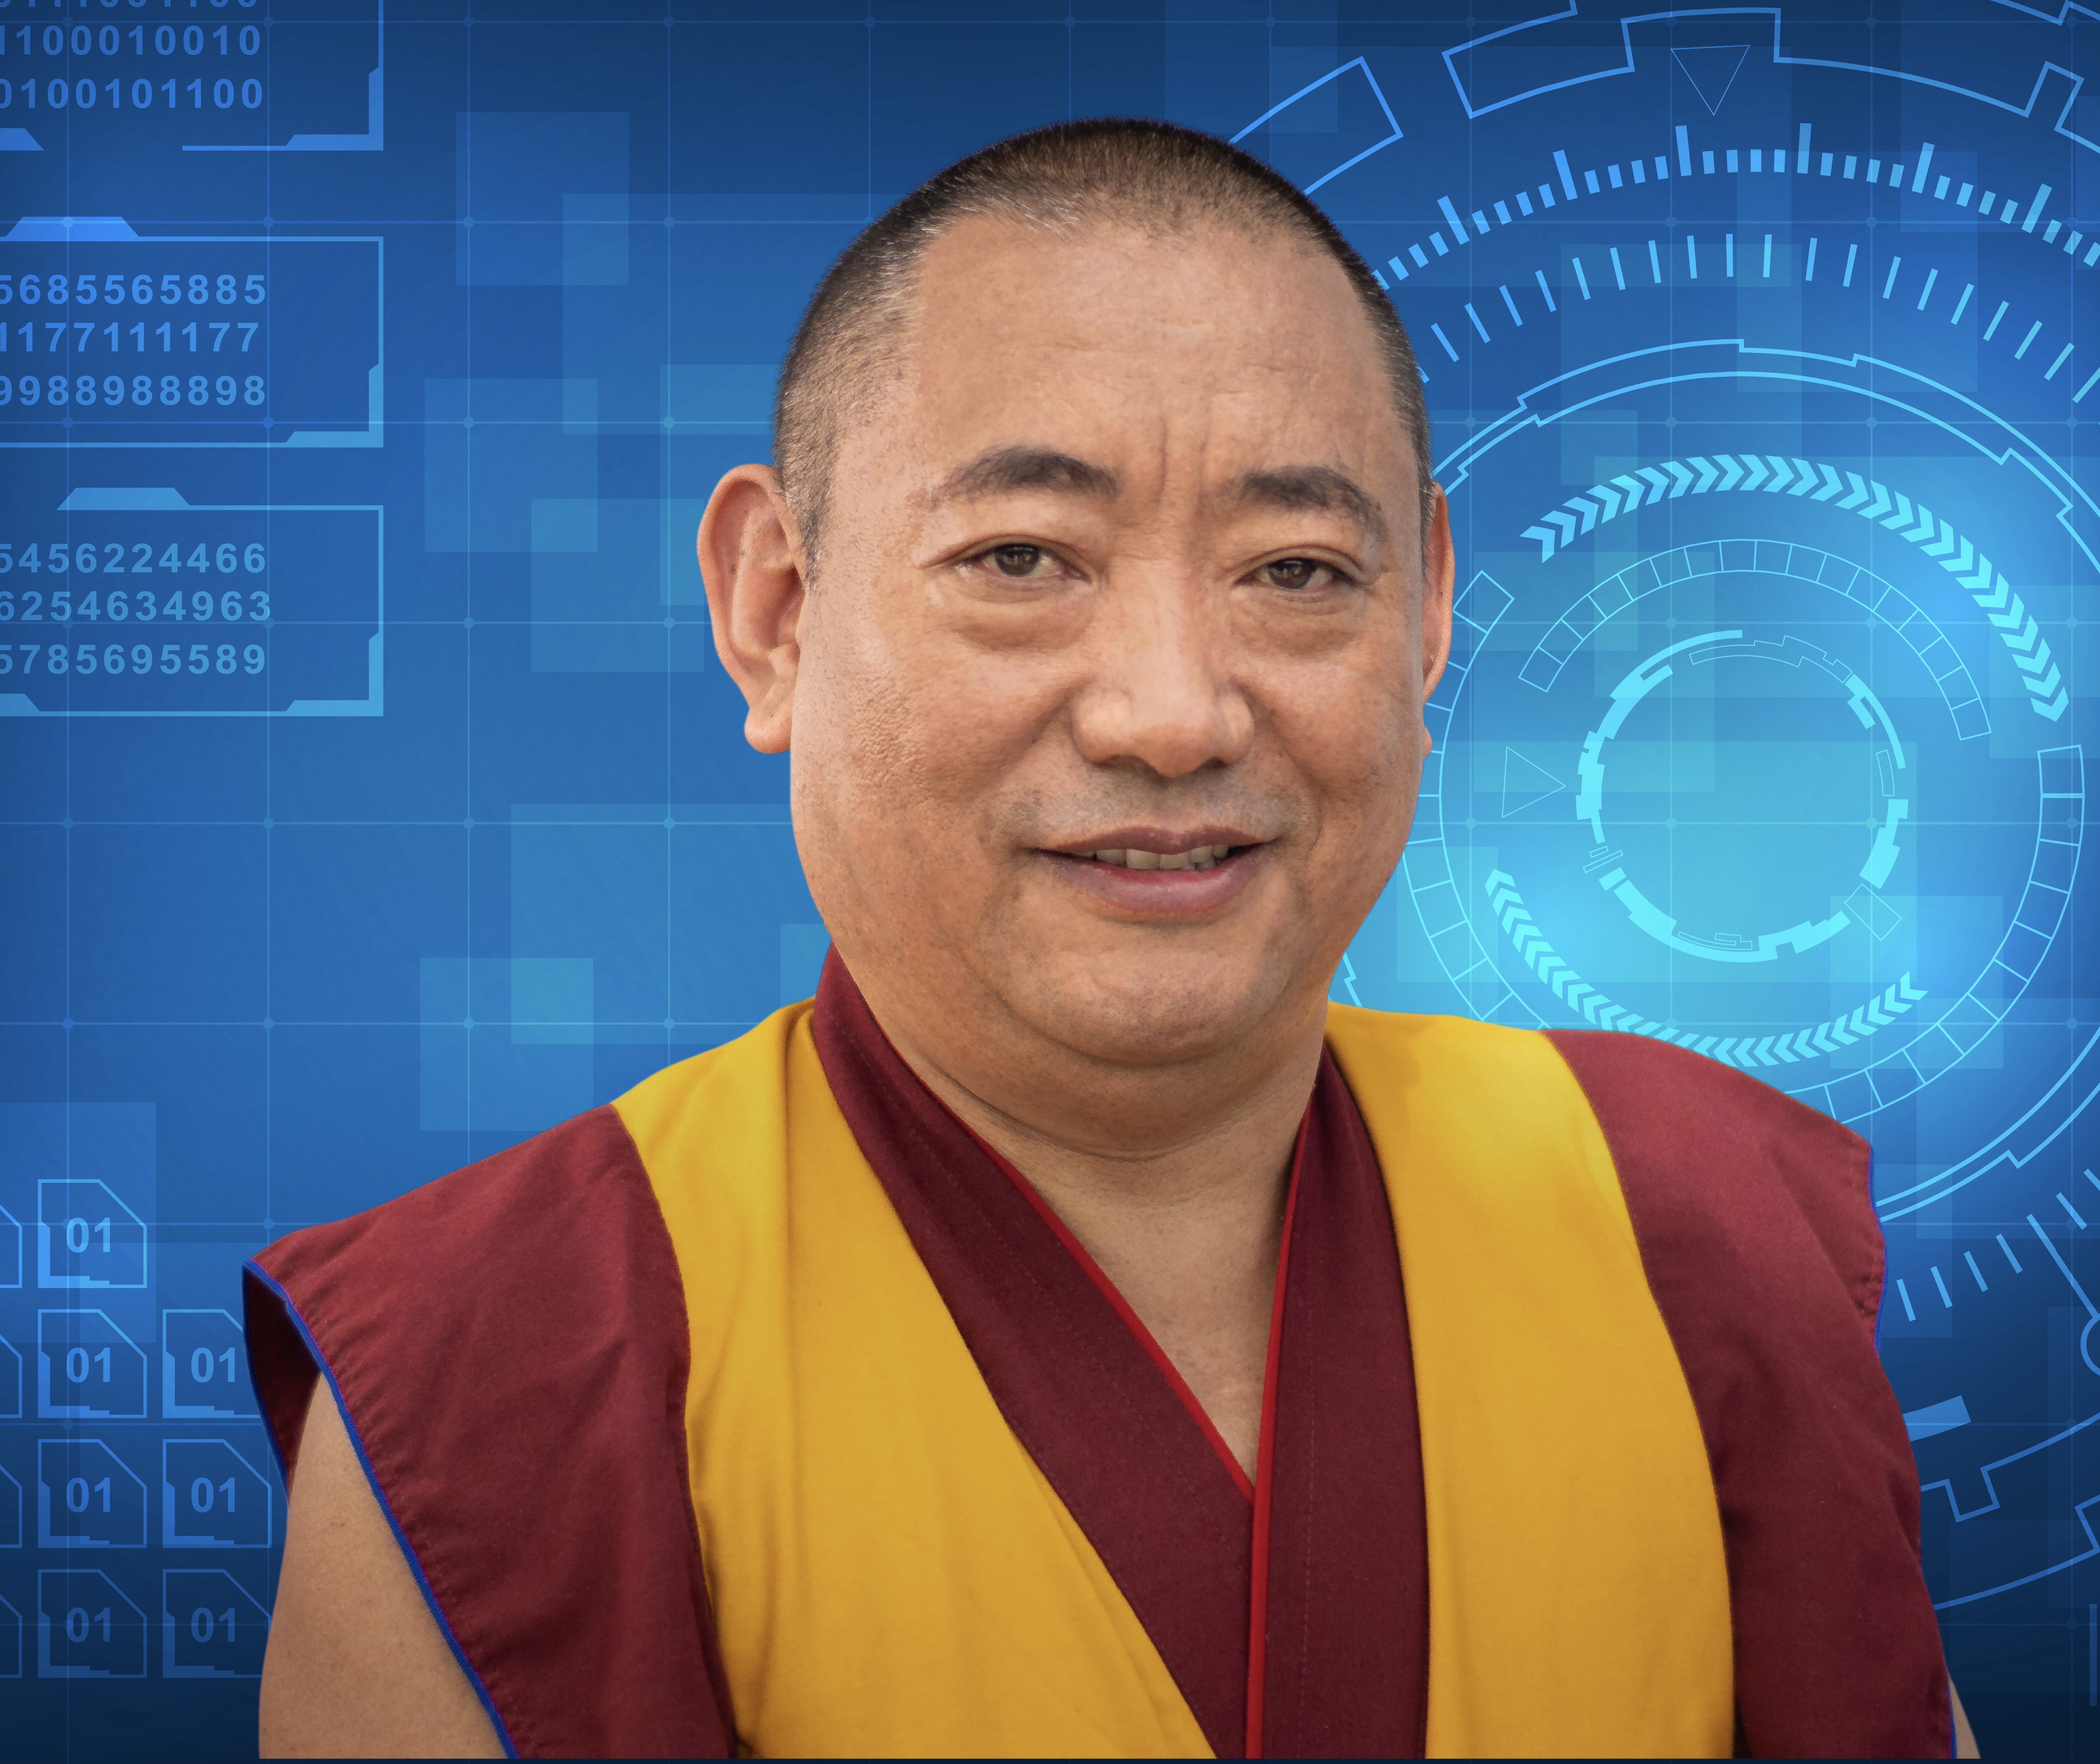 A picture of Geshe Monlam, smiling and looking at the camera